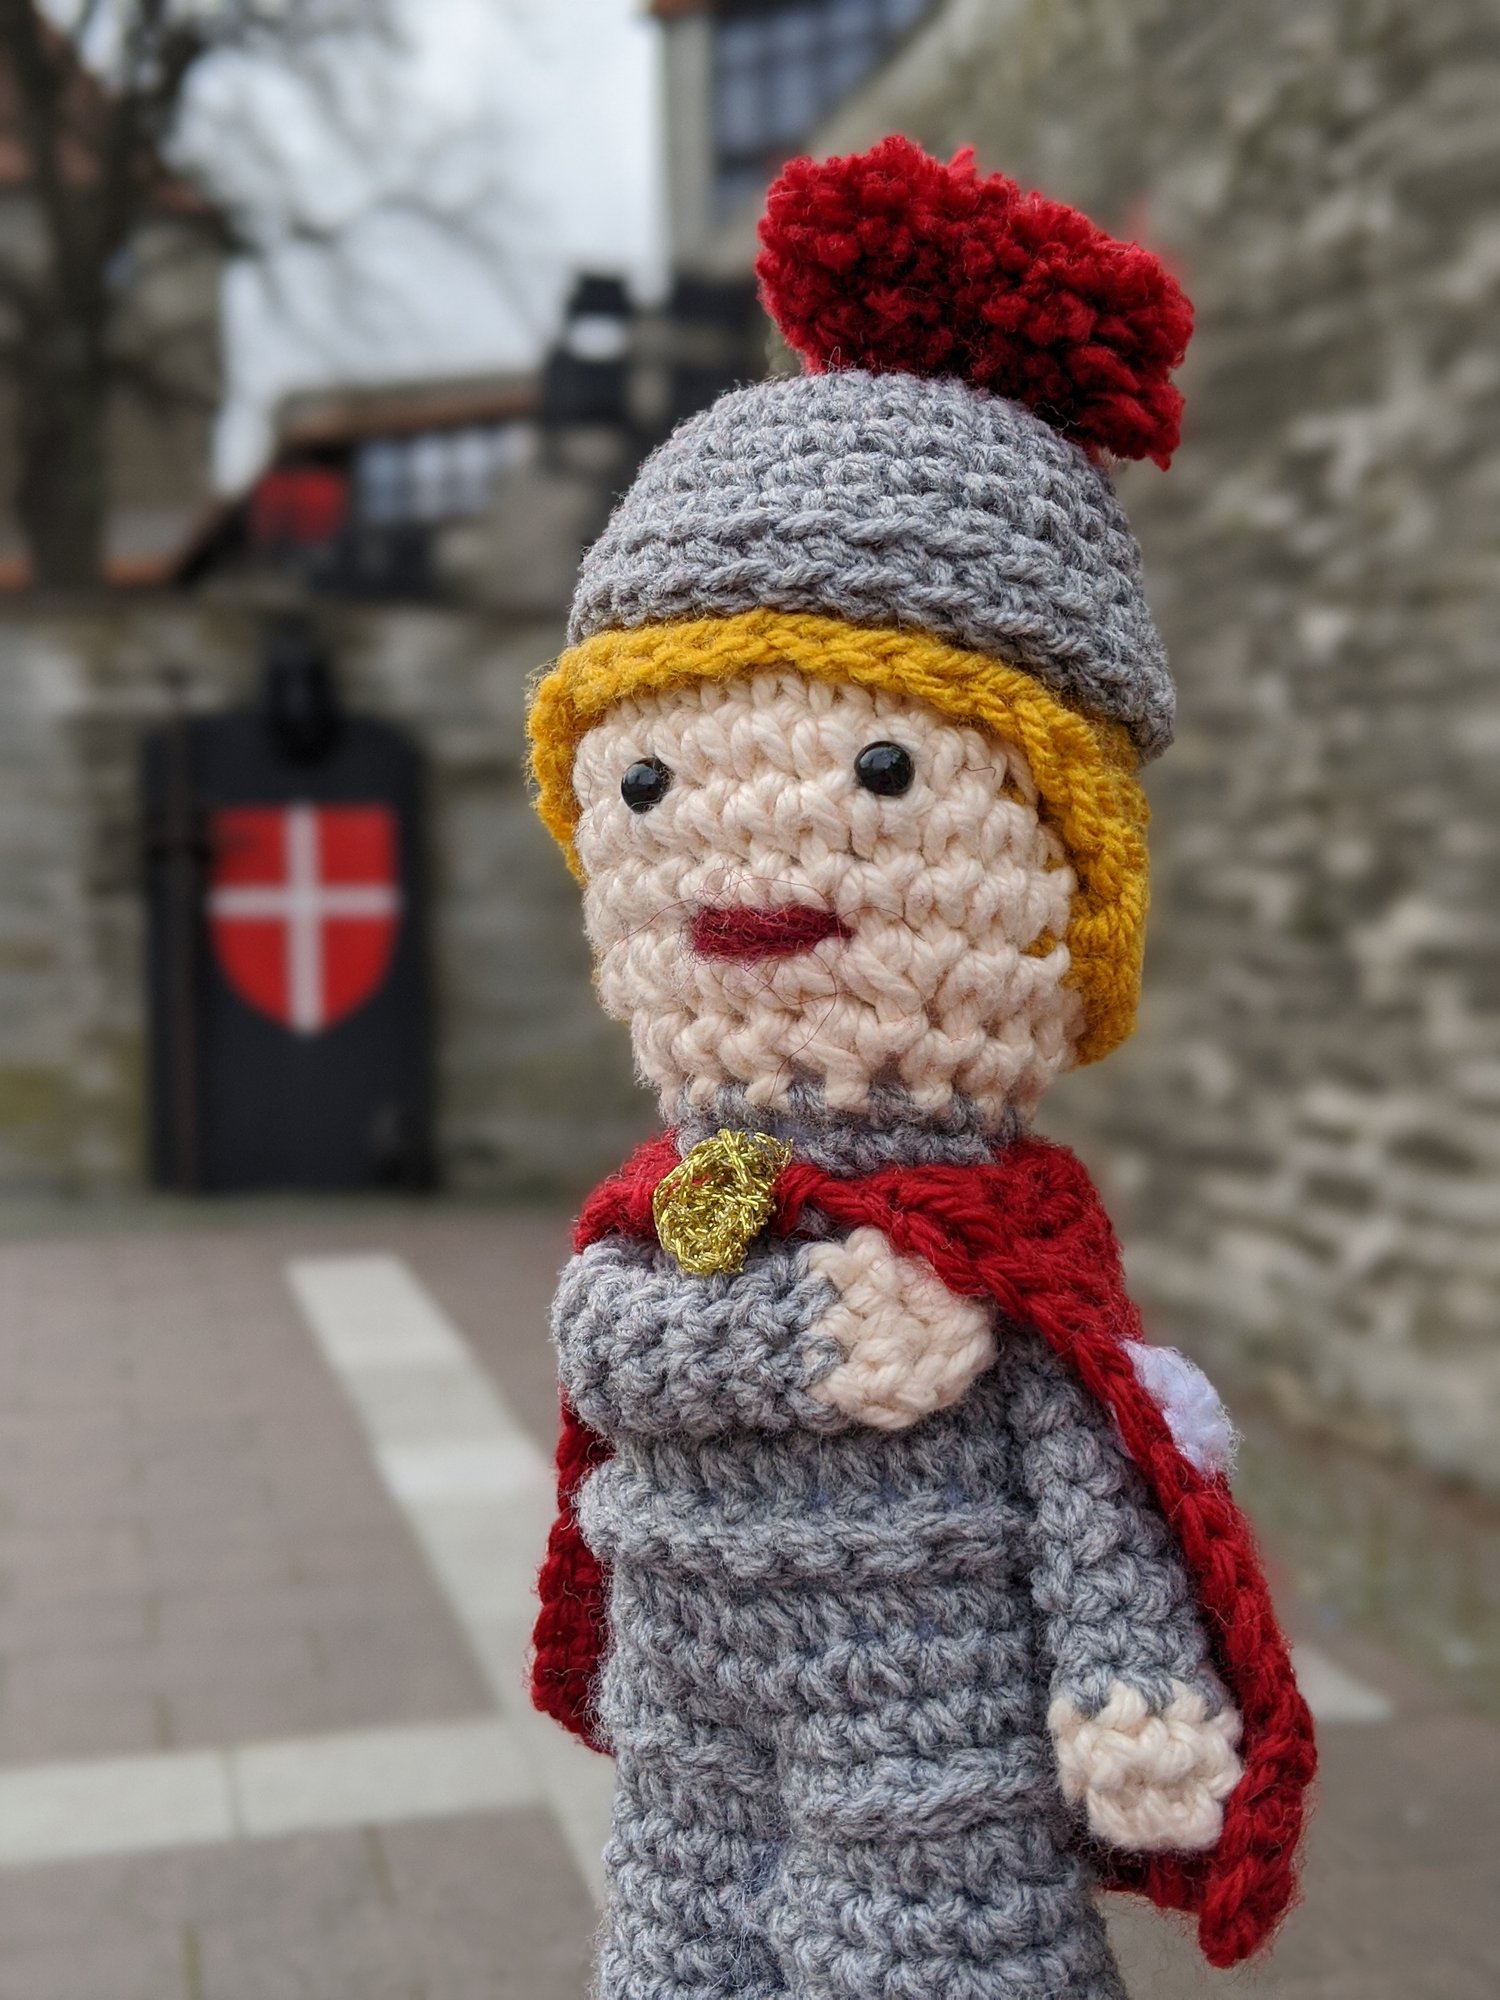 This Googler is crocheting a royal dynasty